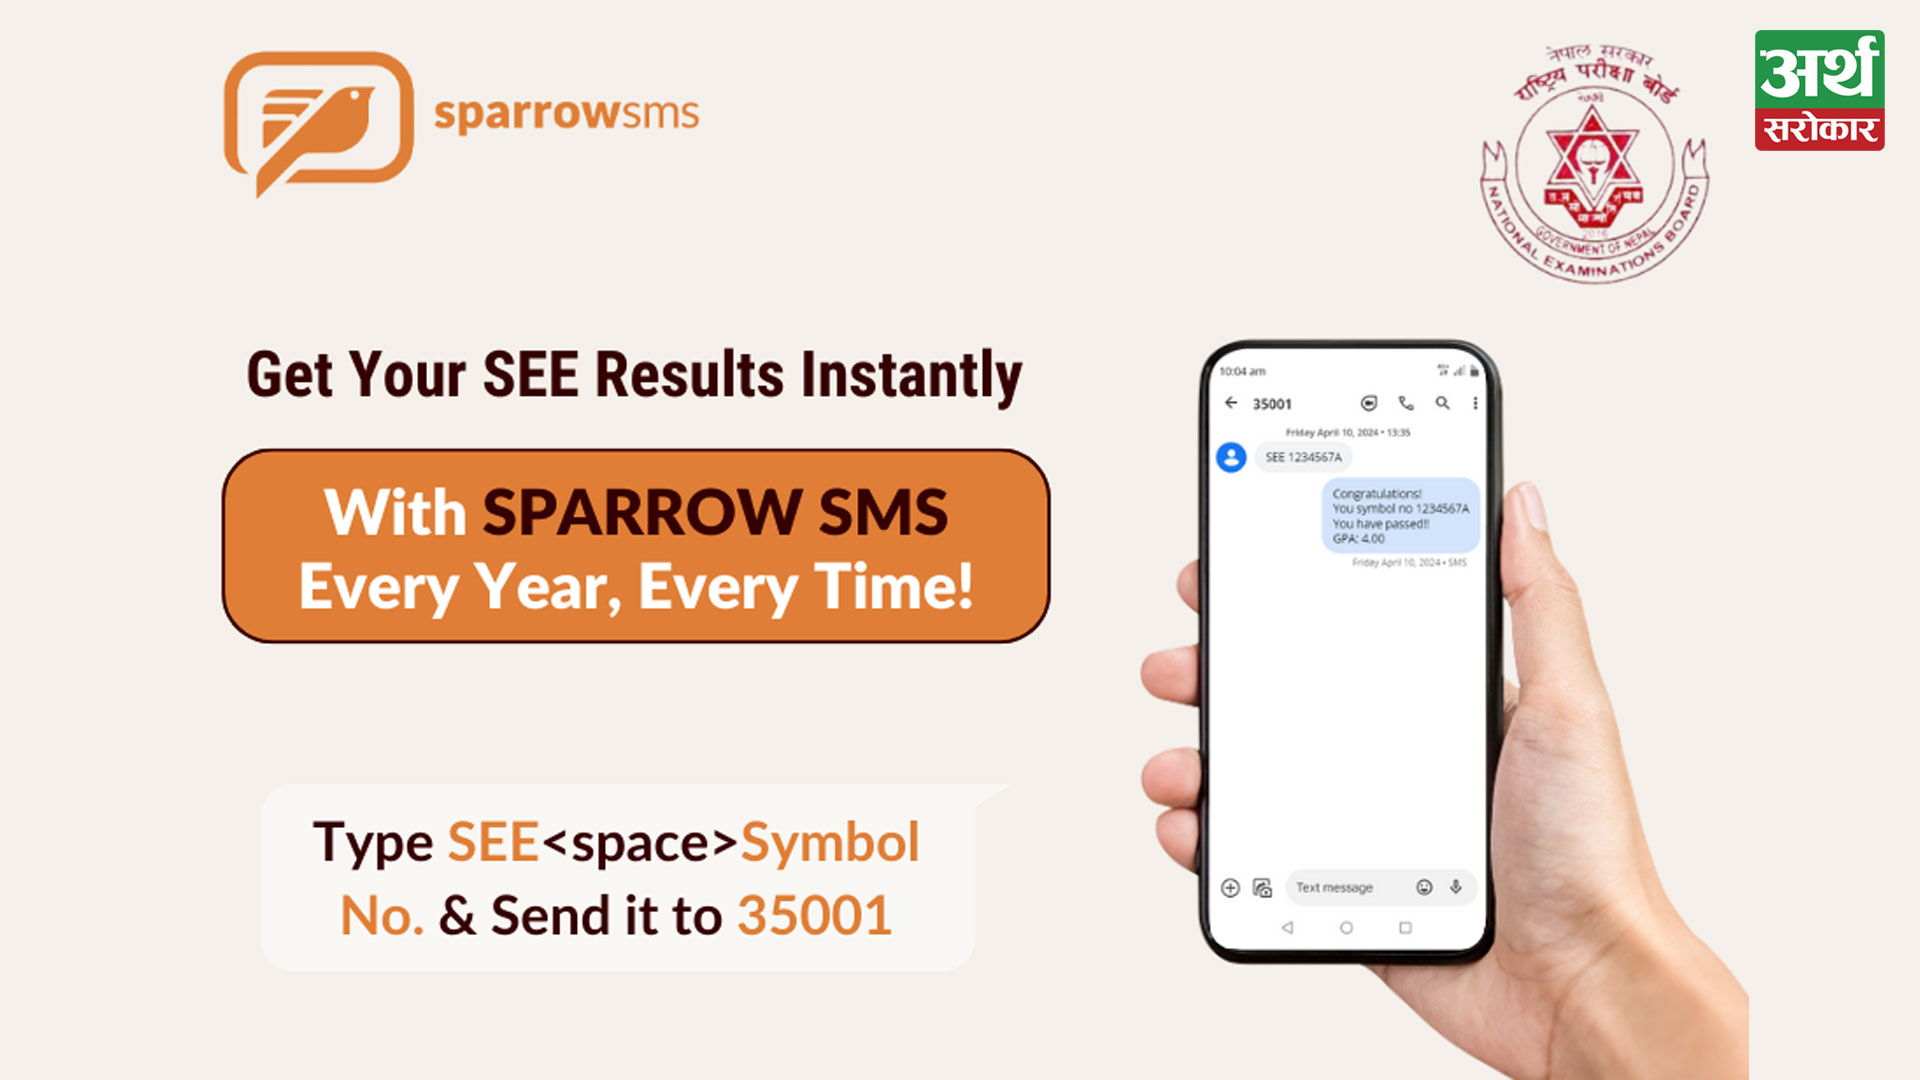 Sparrow SMS Collaborates with the National Examination Board to Bring SEE Results 2080-2081 to Students at Their Fingertips